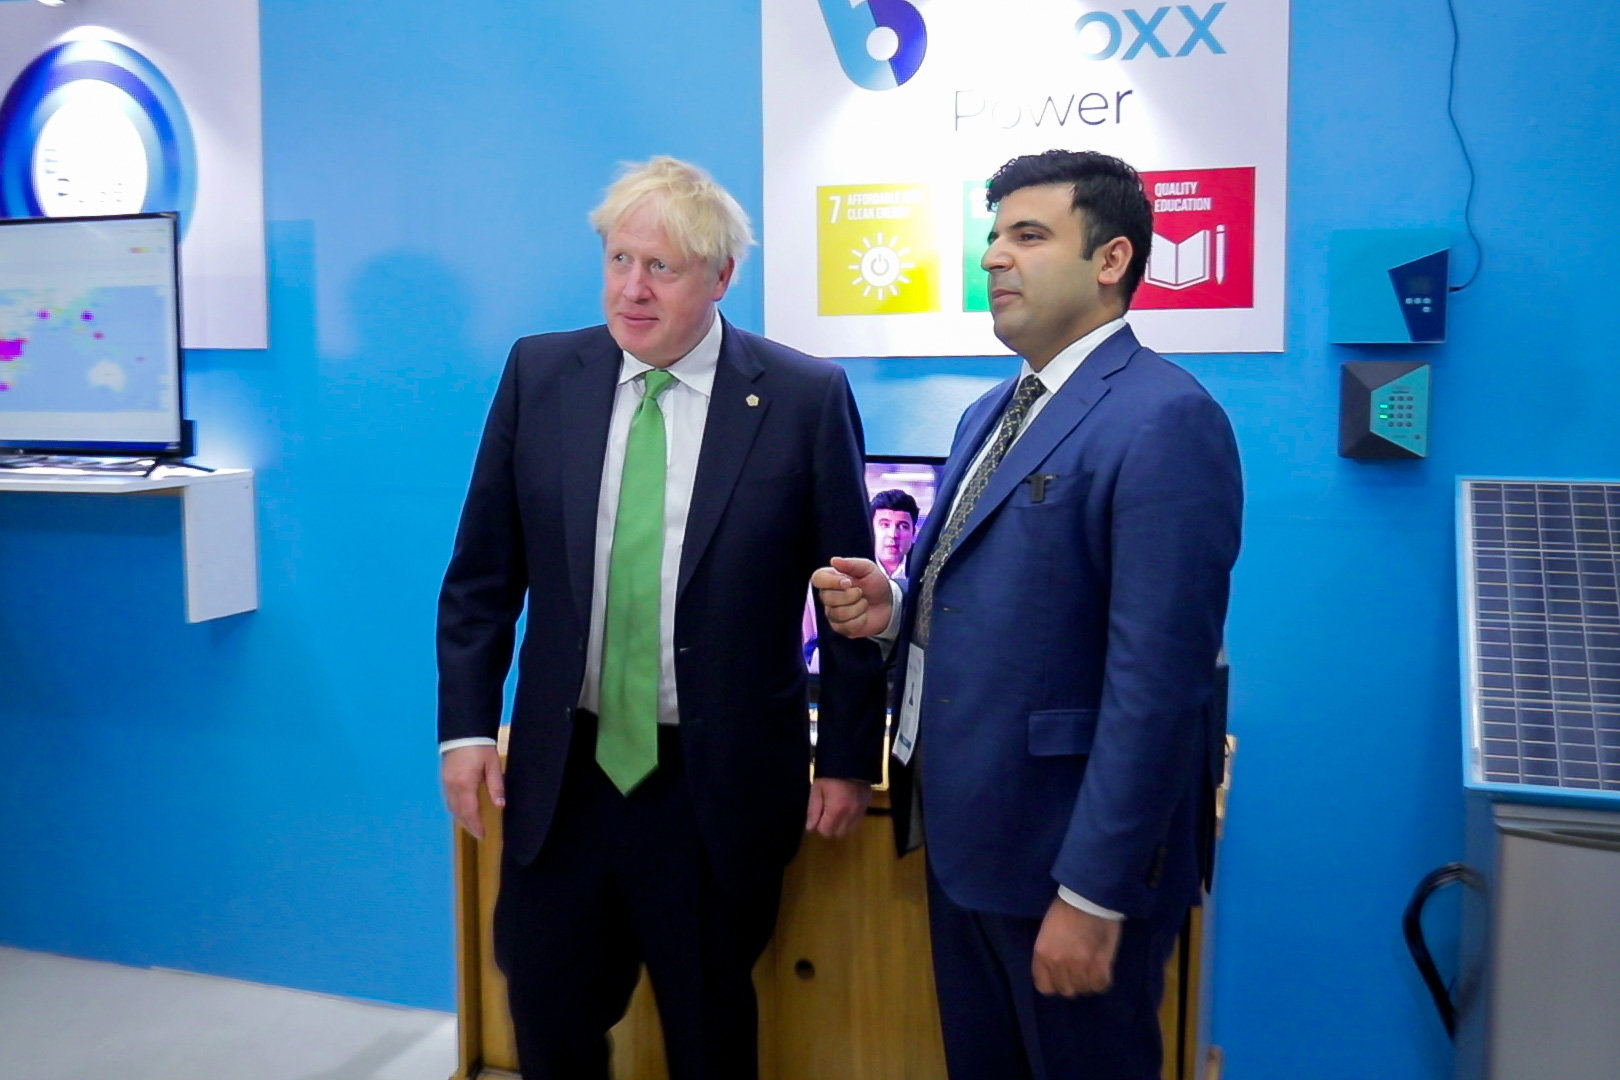 Bboxx CEO Mansoor Hamayun meets UK Prime Minister to discuss driving economic development and green investment in The Commonwealth